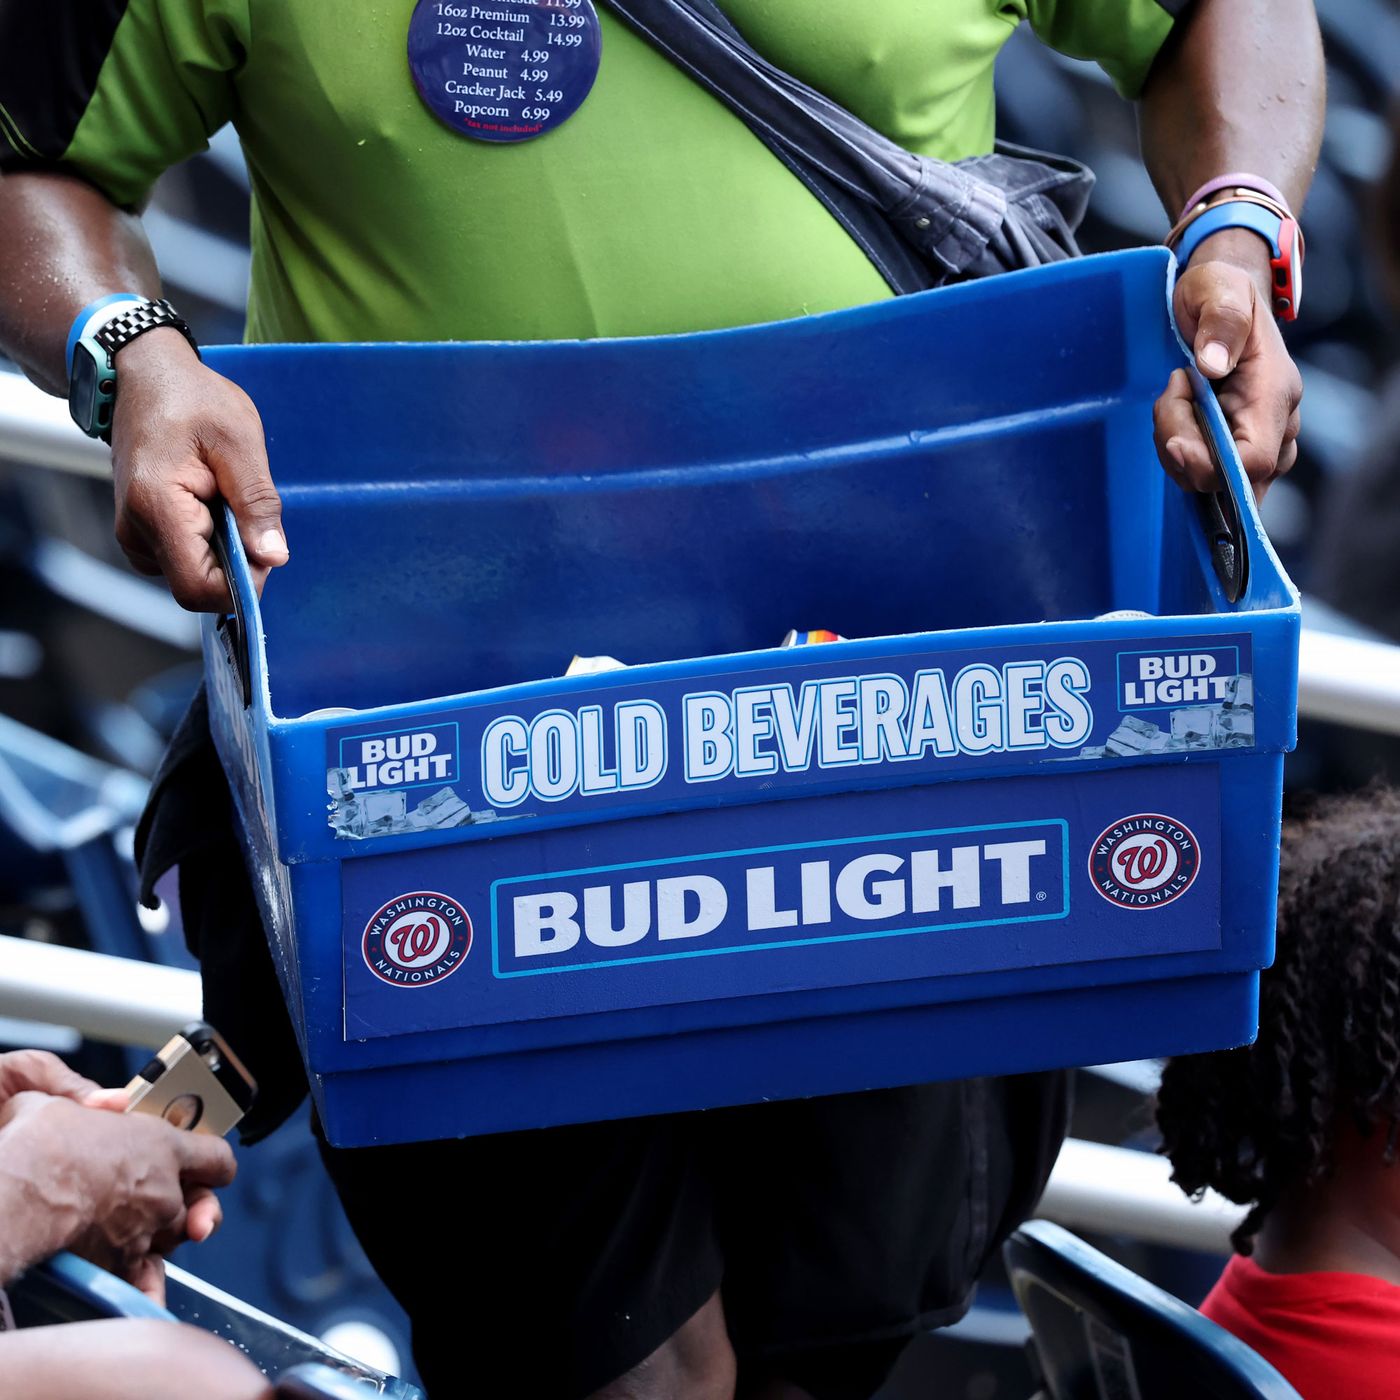 Bud Light Plummets To 14th Place Among Beers As Anheuser-Busch CEO